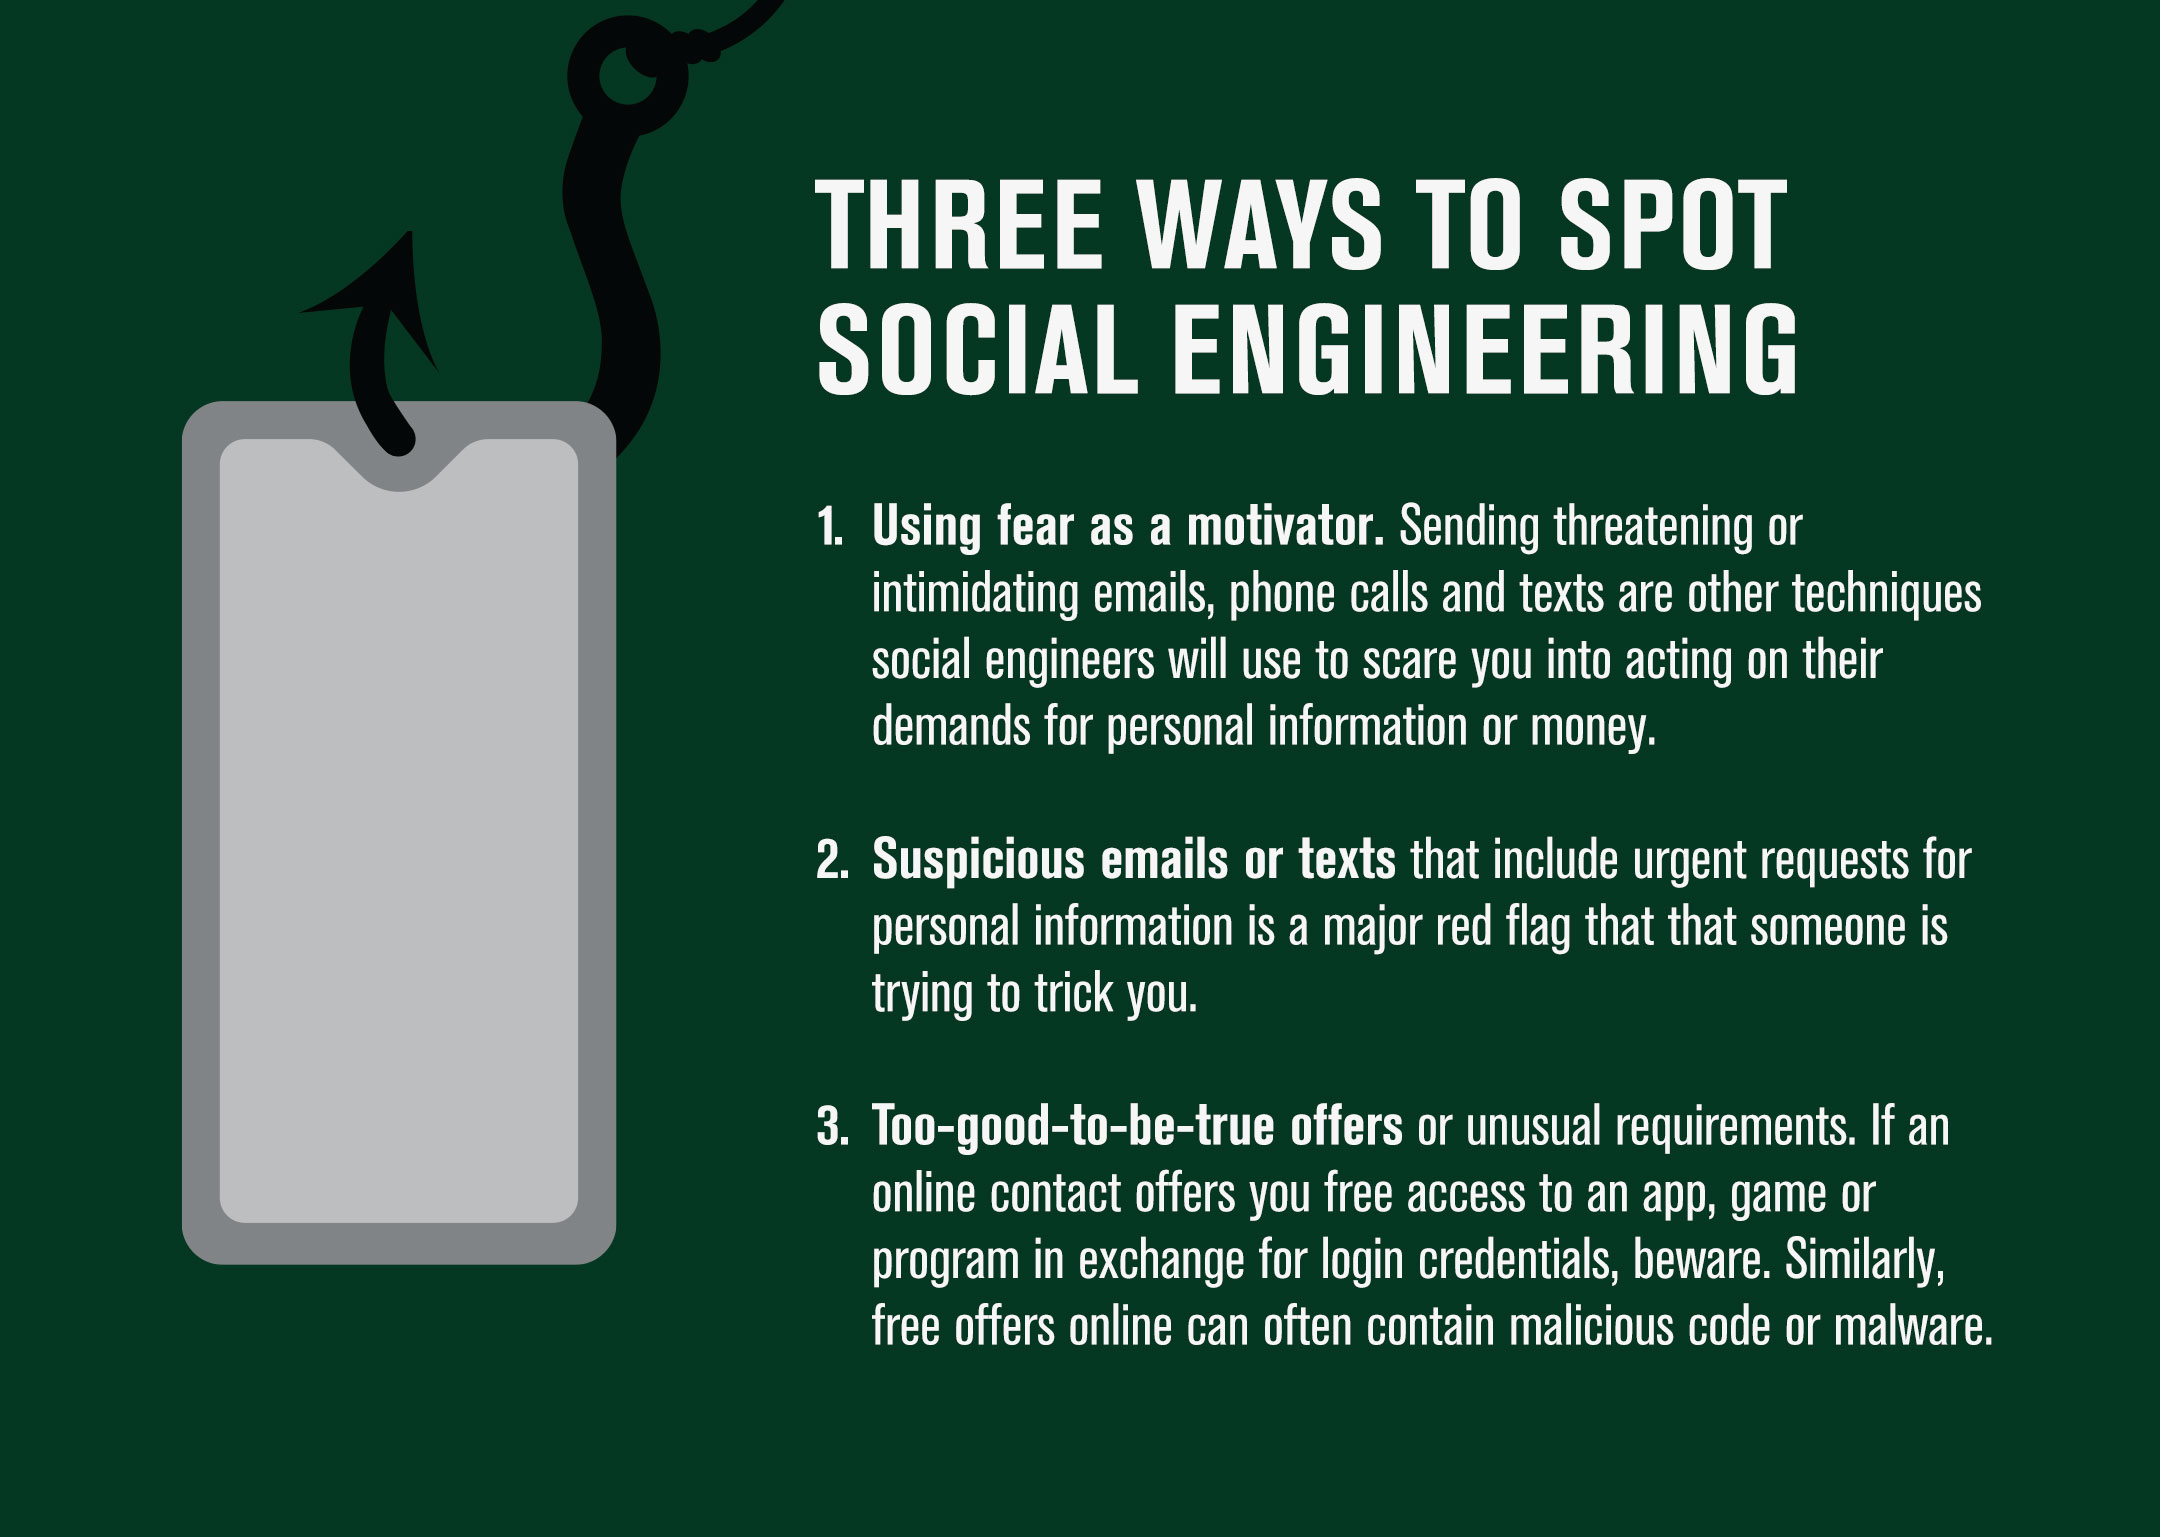 three ways to spot social engineering... the text is included below